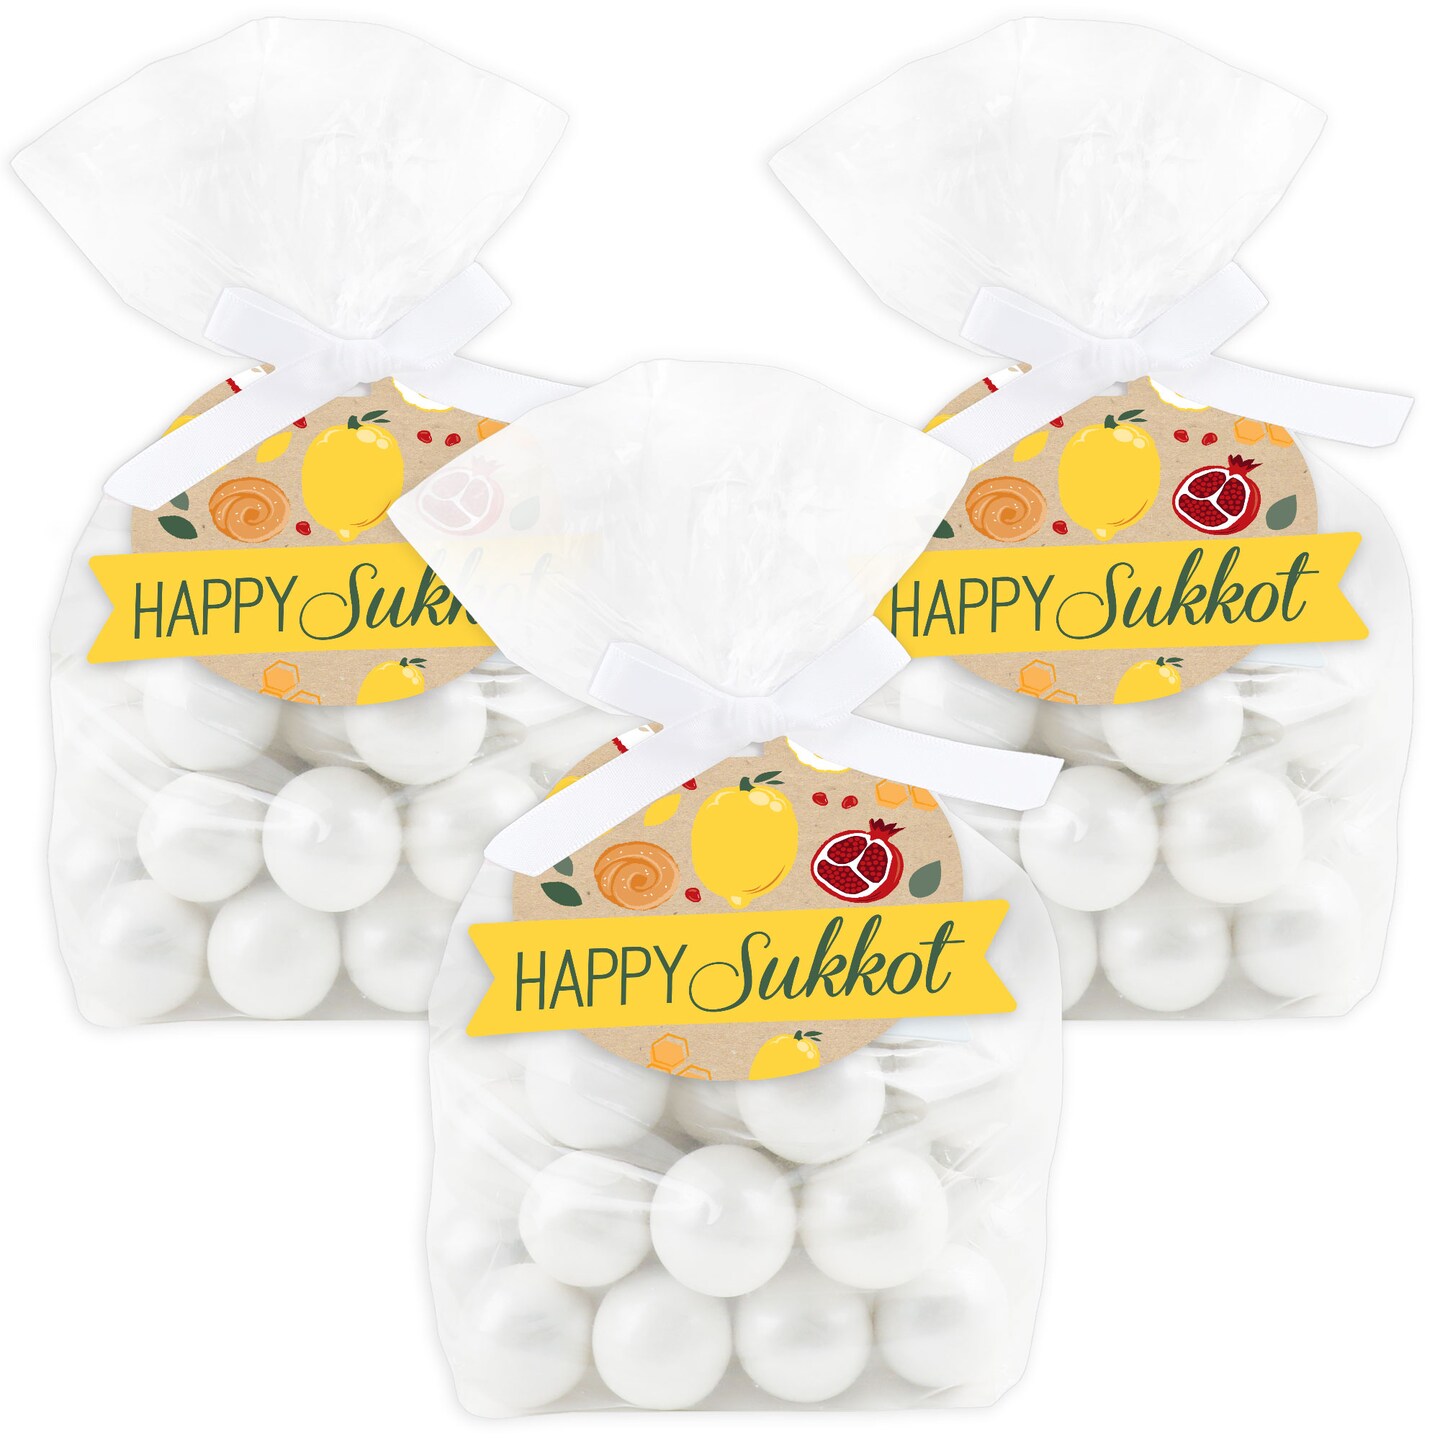 Big Dot of Happiness Sukkot - Sukkah Holiday Clear Goodie Favor Bags - Treat Bags With Tags - Set of 12